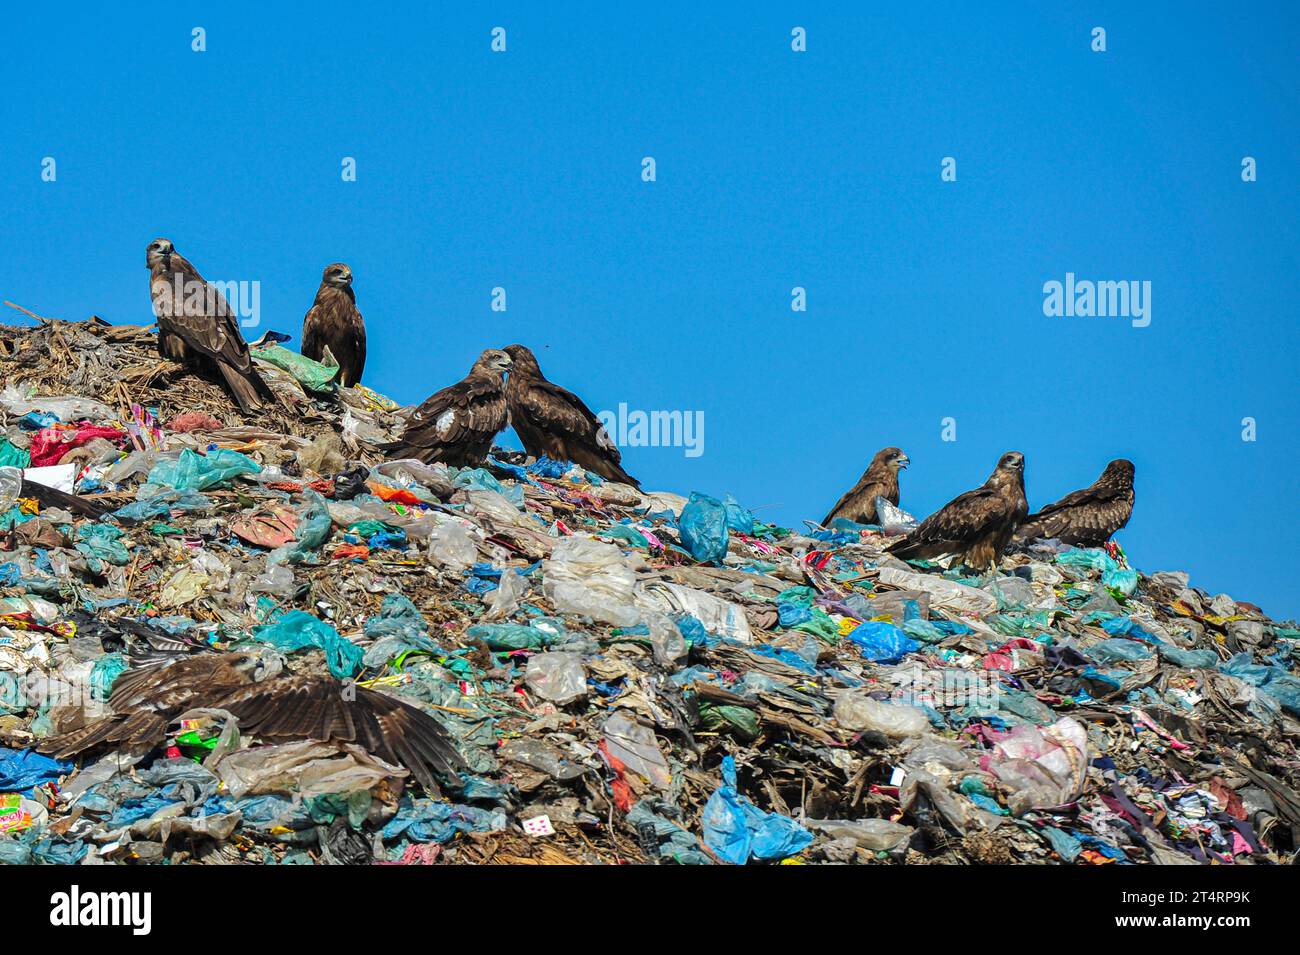 01 November 2023 Sylhet-Bangladesh: Falcon Hawks at Sylhet's Parairchak garbage dump yardf in Sylhet of Bangladesh. They look for food from the leftover dirt. They also play a role the Ecological cycle. The falcon is a diurnal bird of prey in the family Falconidae of the class Ciconiiformes. Out of 9 species of Bangladesh, 5 species are migratory. Among them, the dune falcon bird is considered as an almost extinct species of bird in the animal world. Falcon Hawks are also a great asset to many farmers, killing millions of crop-destroying animals and insects. On 01 November 2023 Sylhet, Banglad Stock Photo